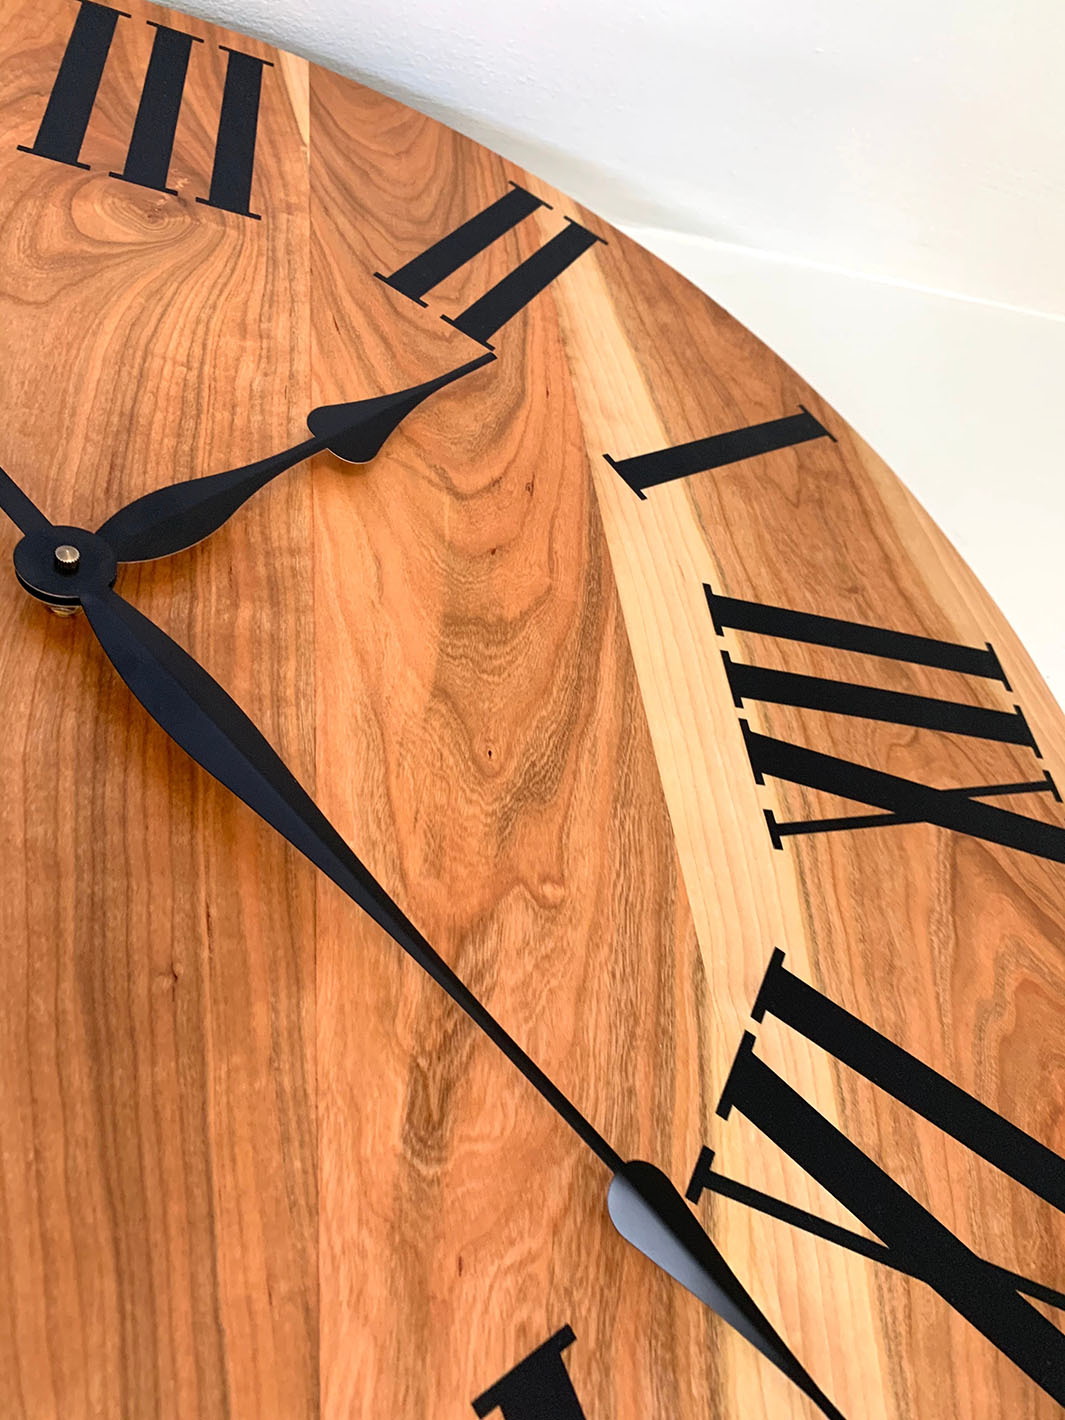 Large Sappy Cherry Hardwood Wall Clock with Black Roman Numerals Earthly Comfort Clocks 1524-4